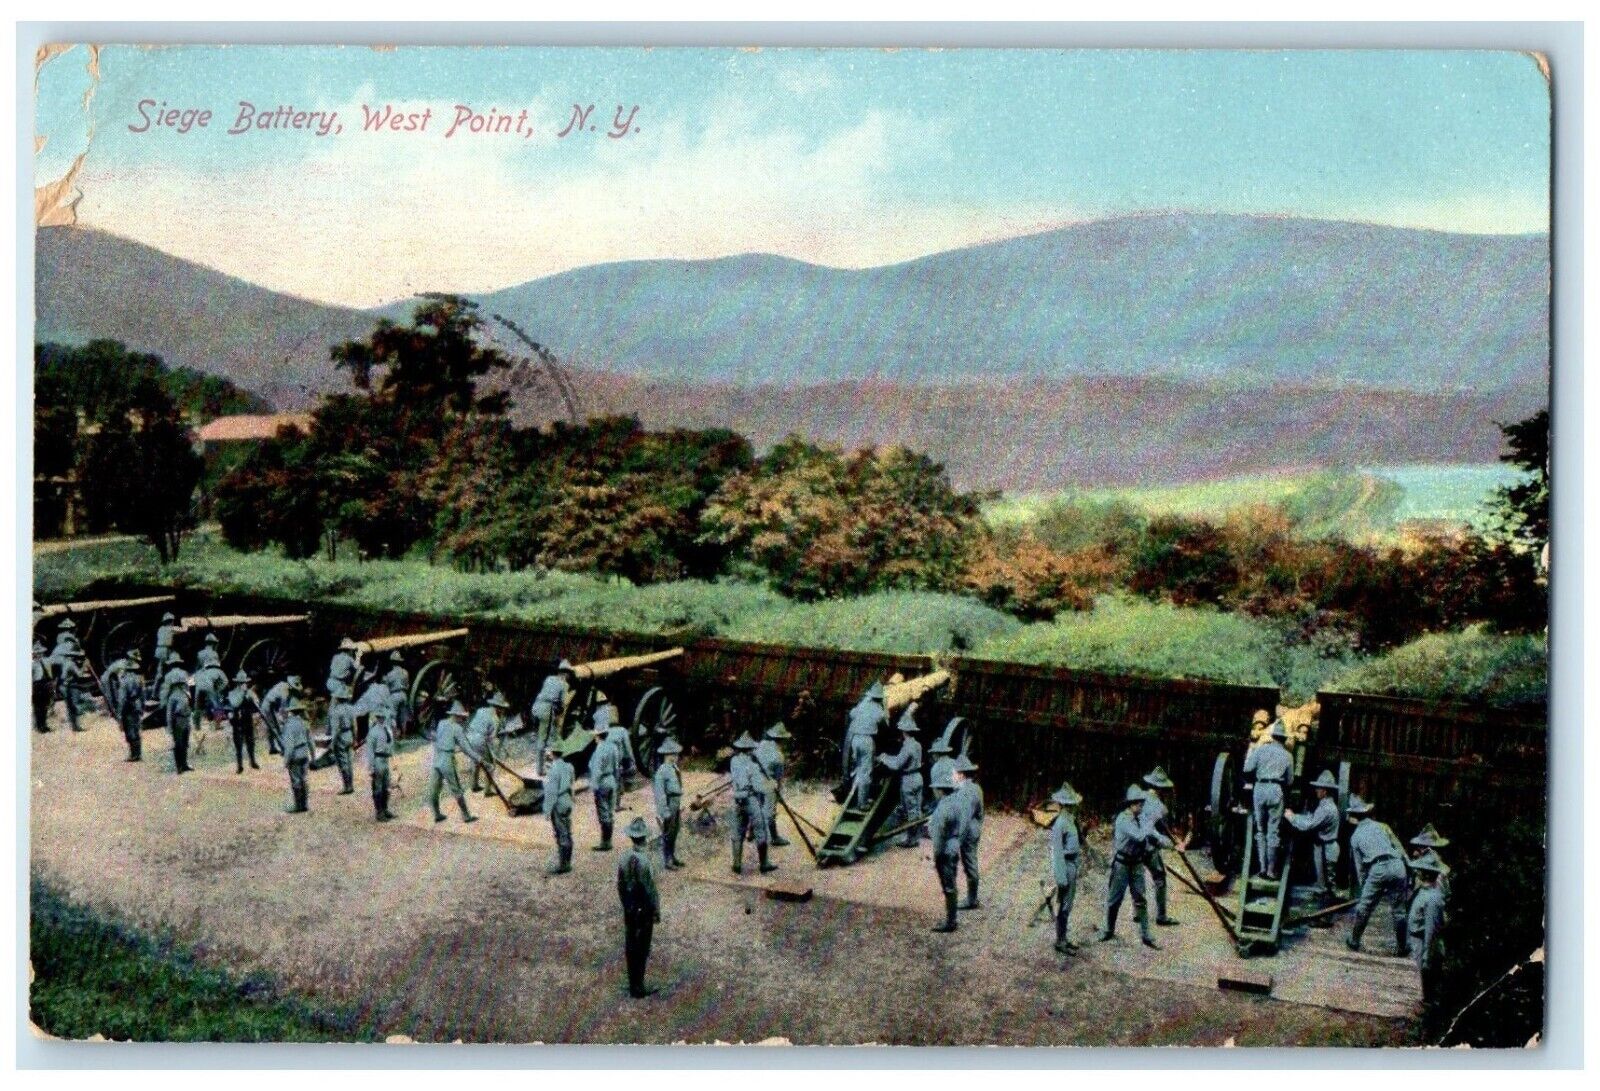 1910 Siege Battery Cannon Soldier Army West Point New York NY Vintage Postcard